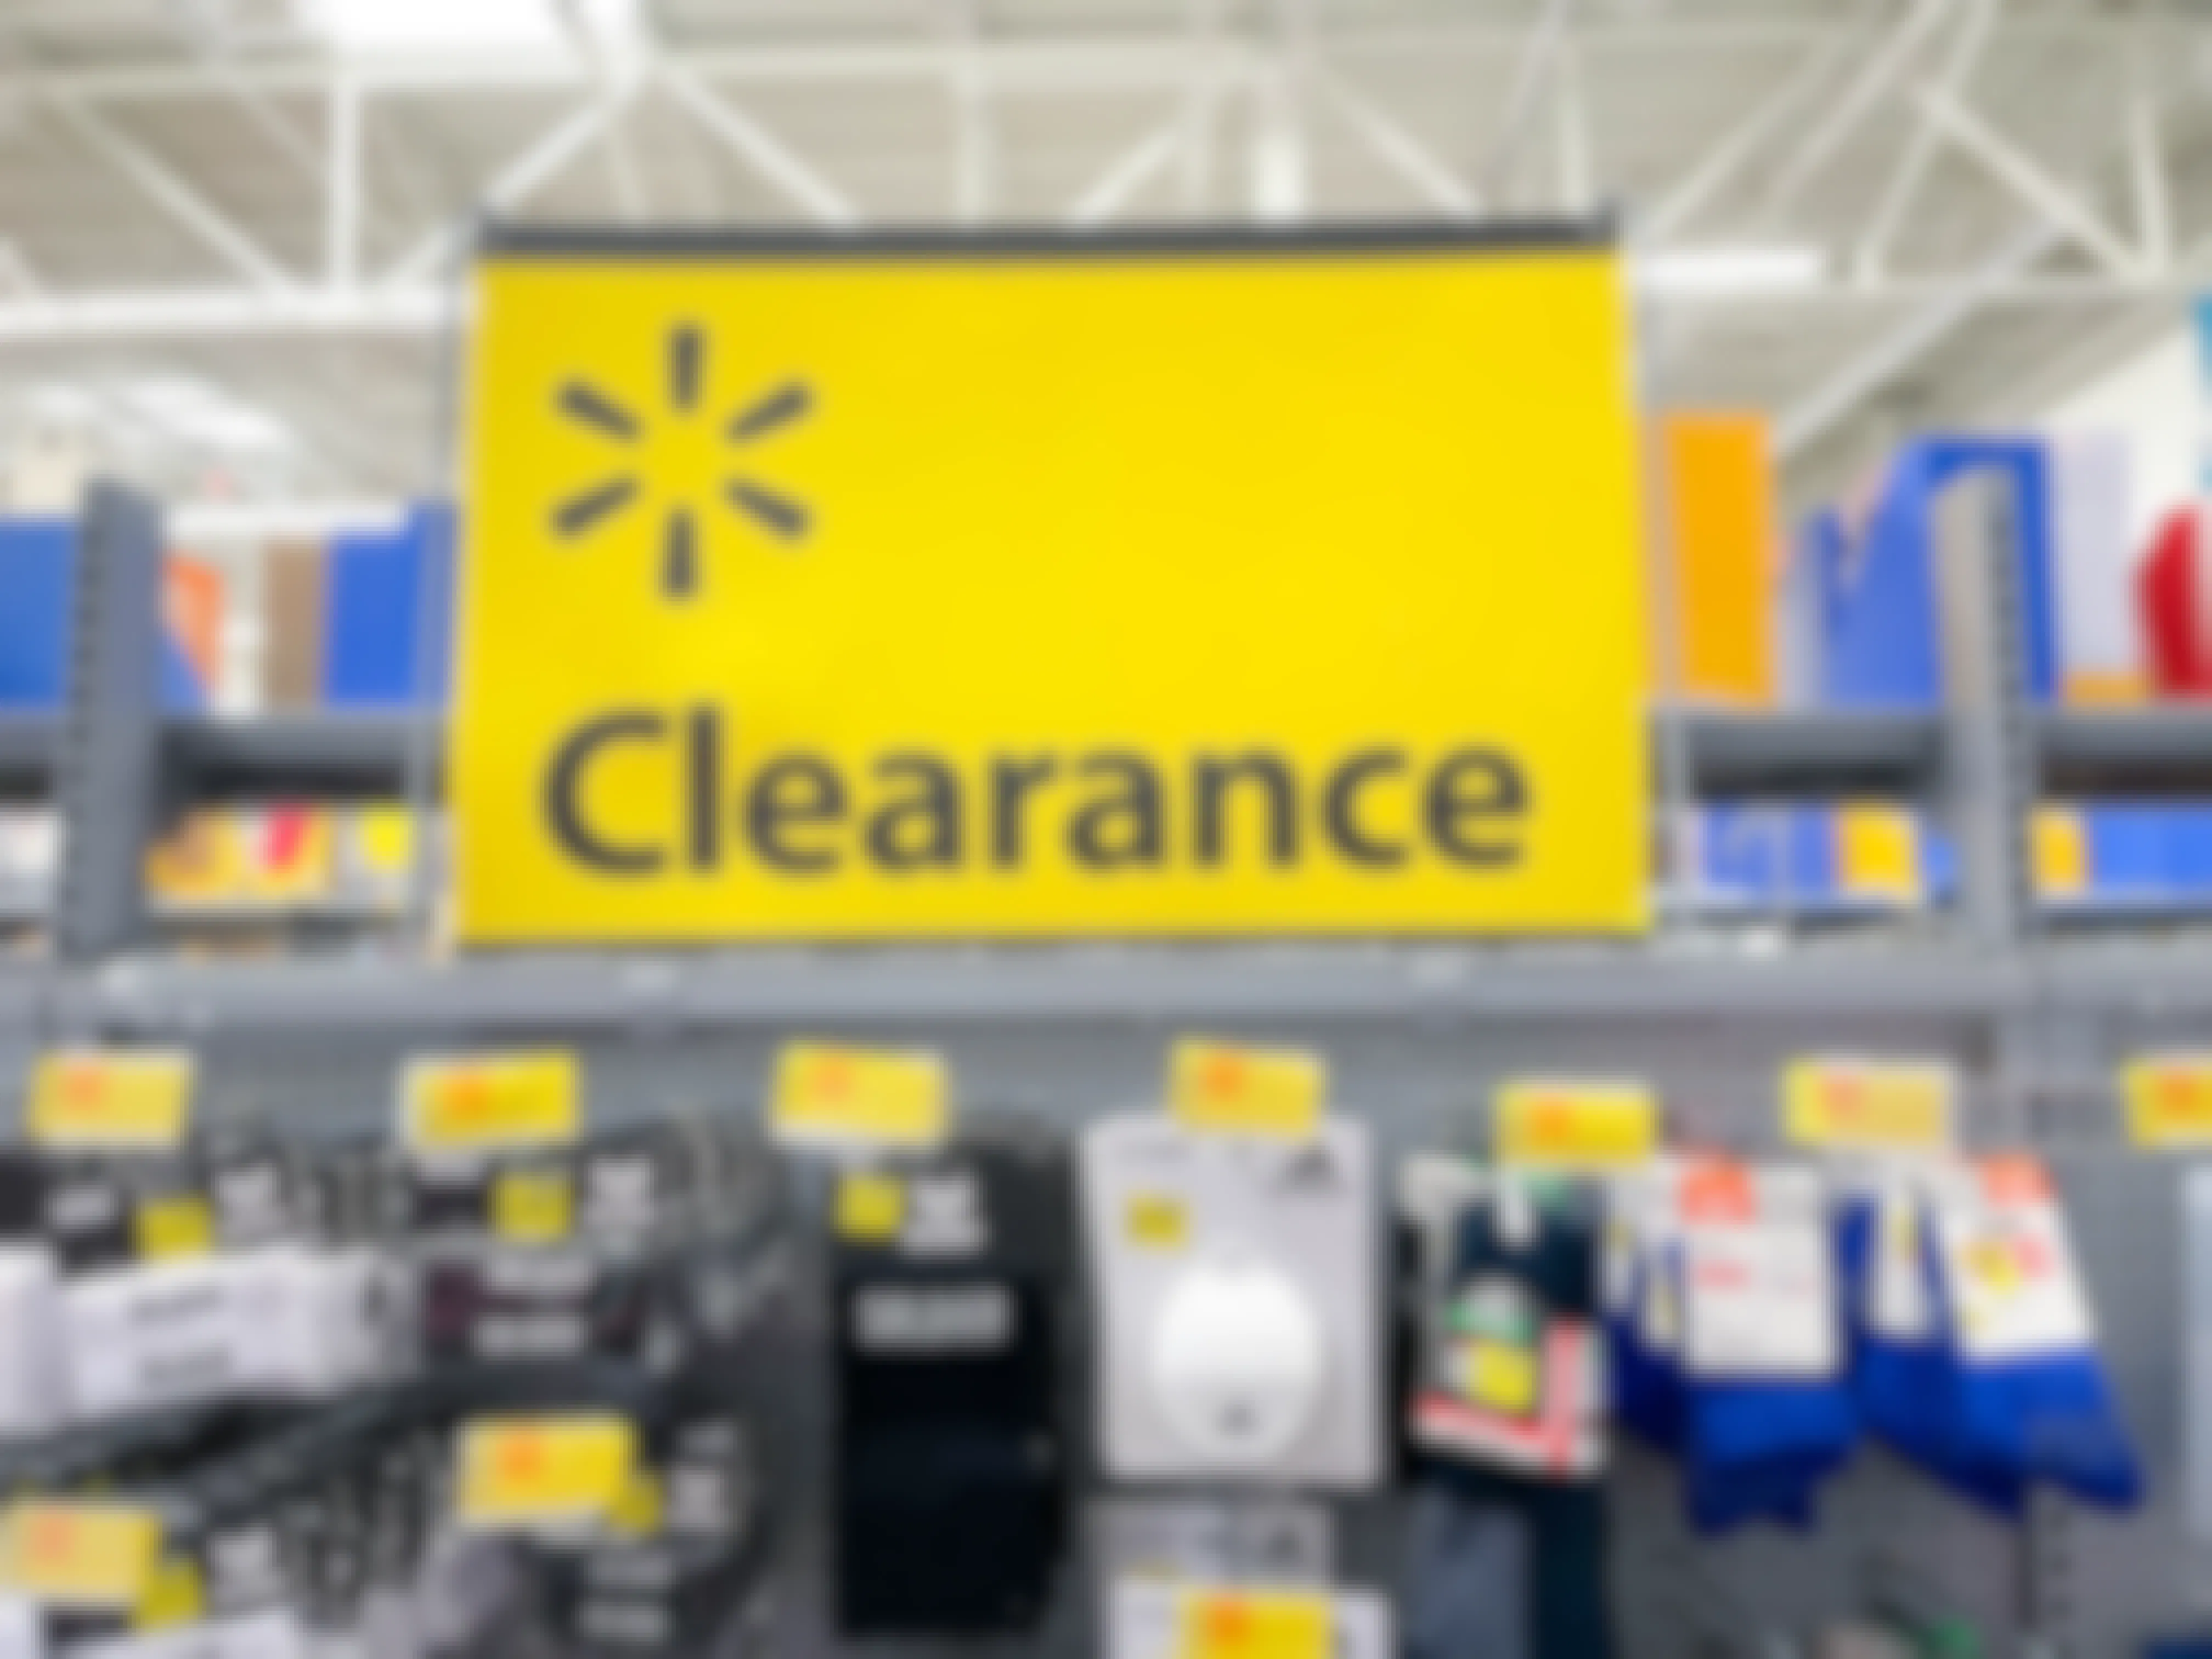 display of athletic items at Walmart yellow Clearance sign